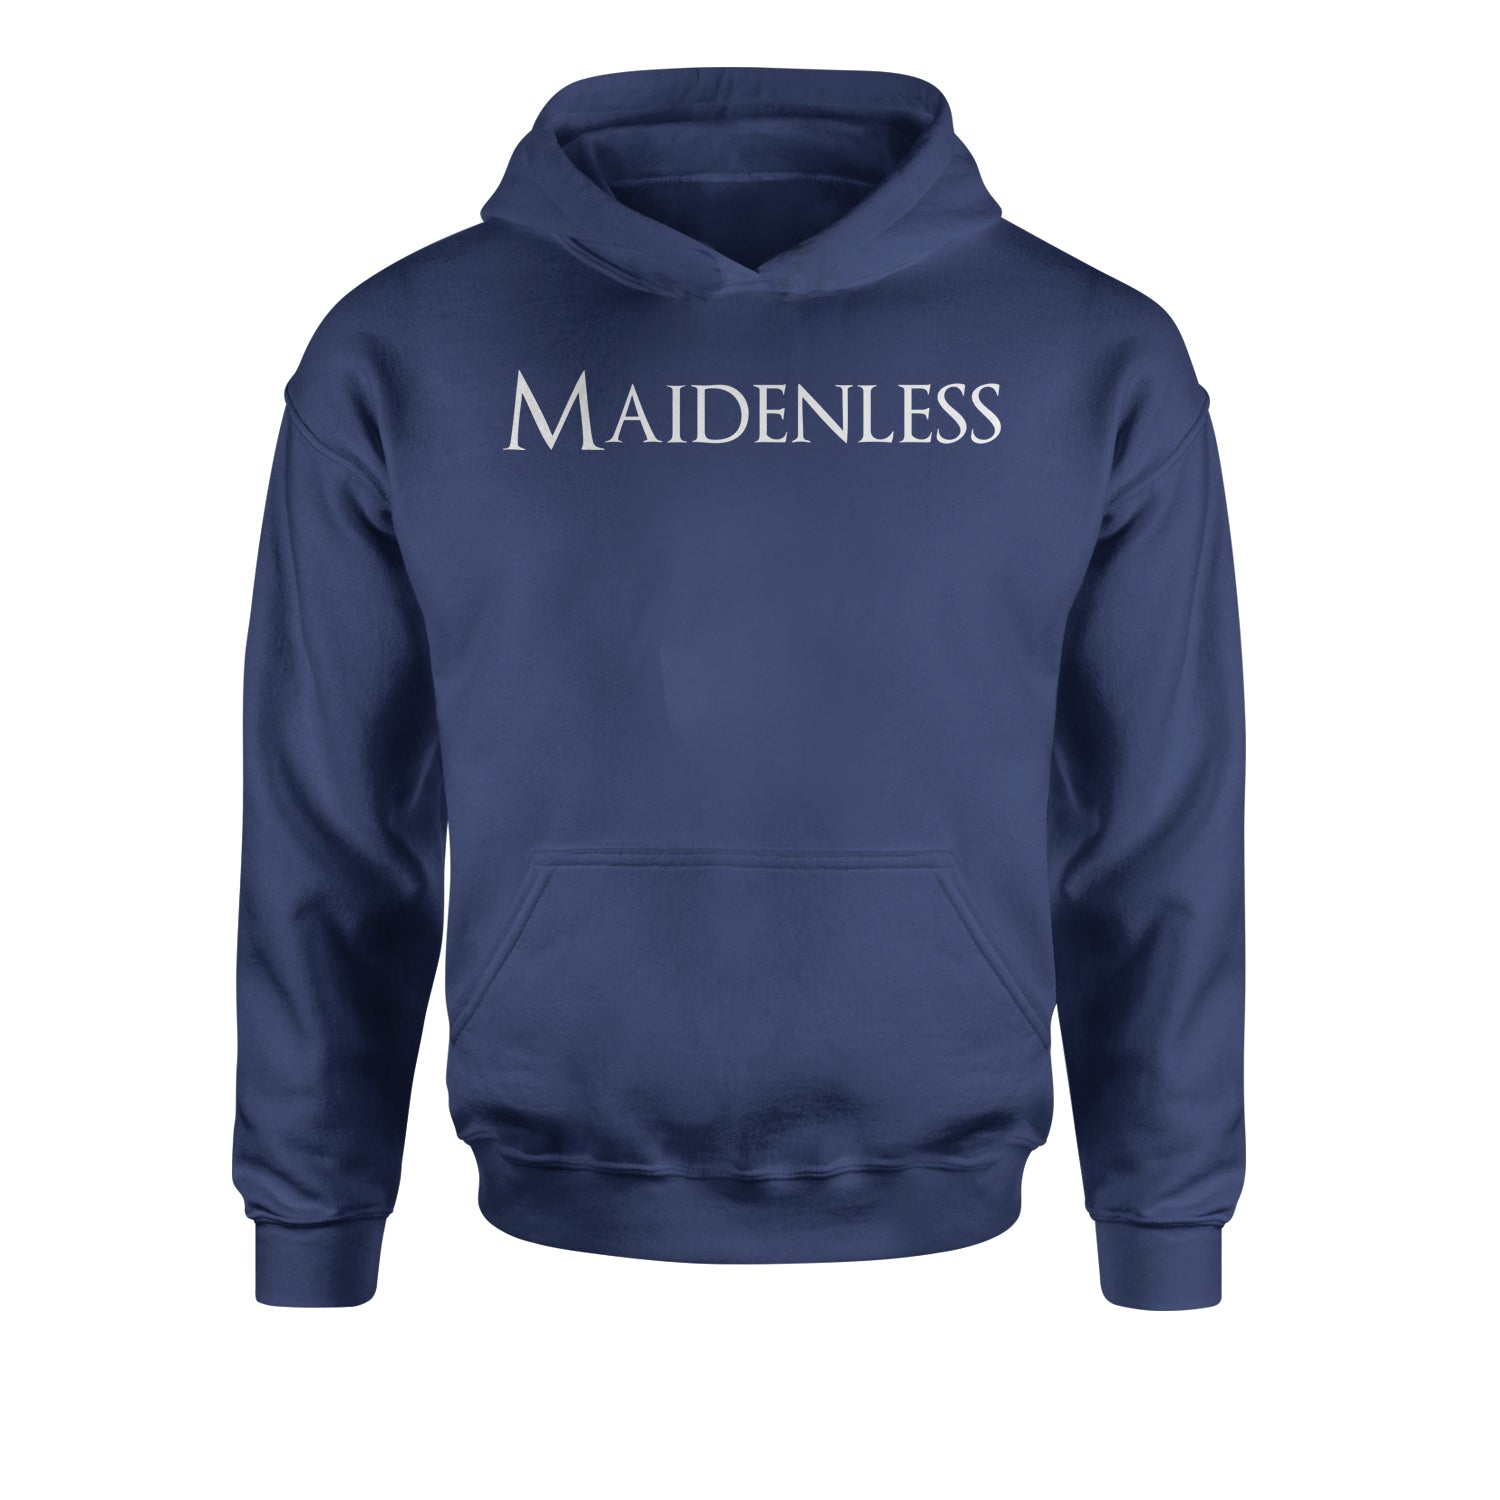 Maidenless Youth-Sized Hoodie elden, game, video by Expression Tees